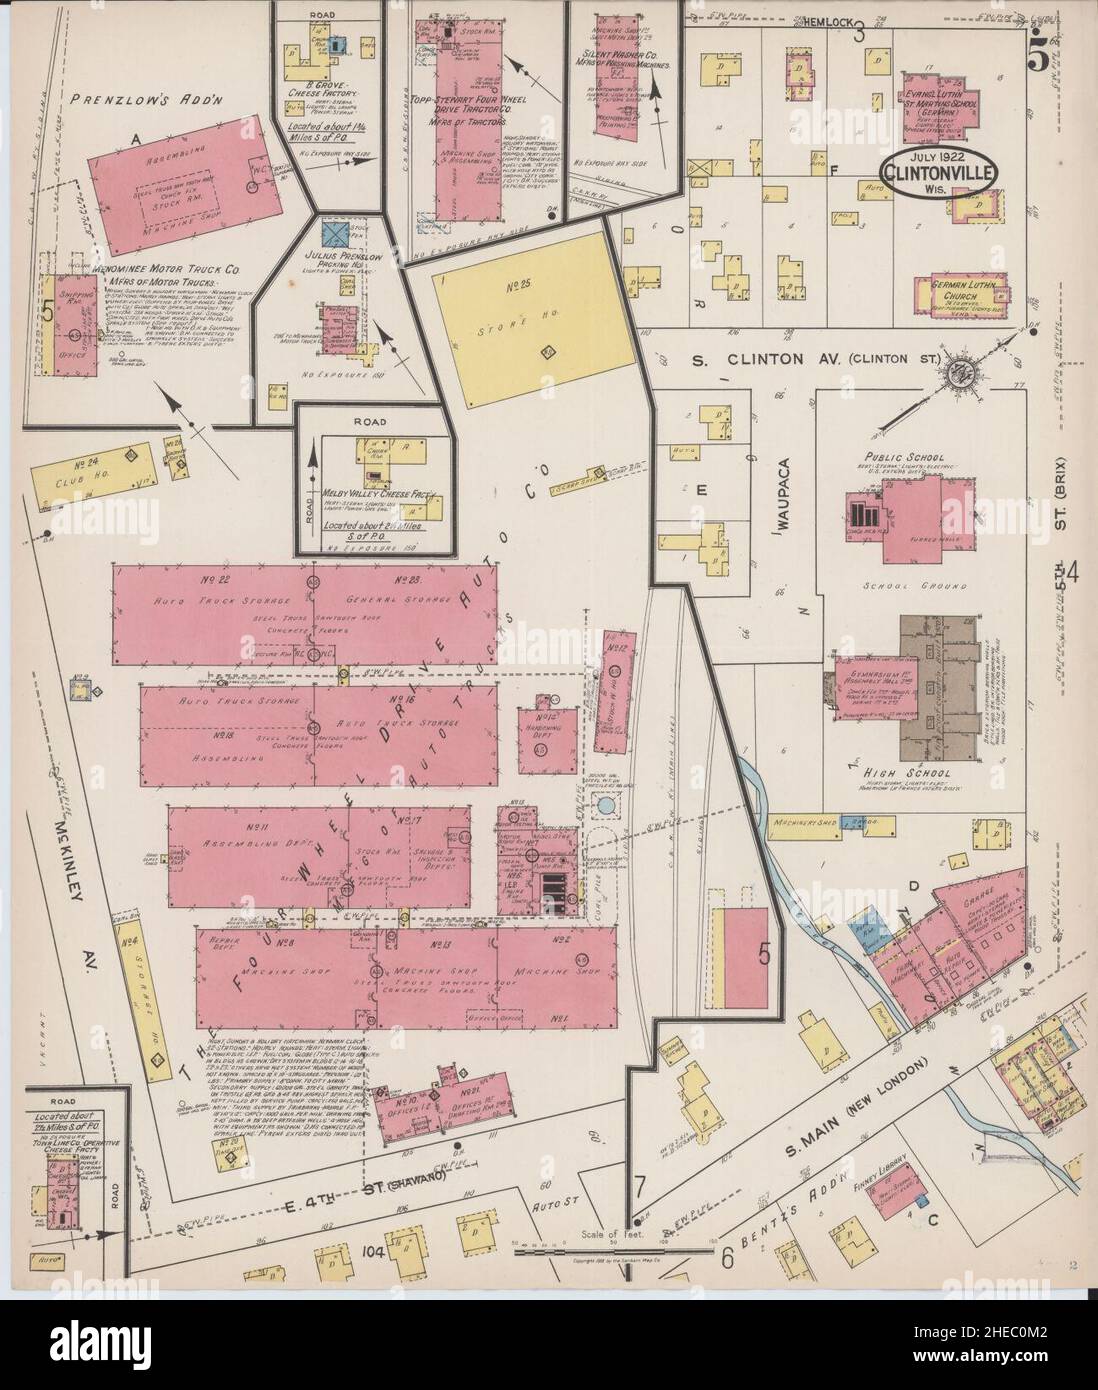 Sanborn Fire Insurance Map from Clintonville, Waupaca County, Wisconsin. Stock Photo